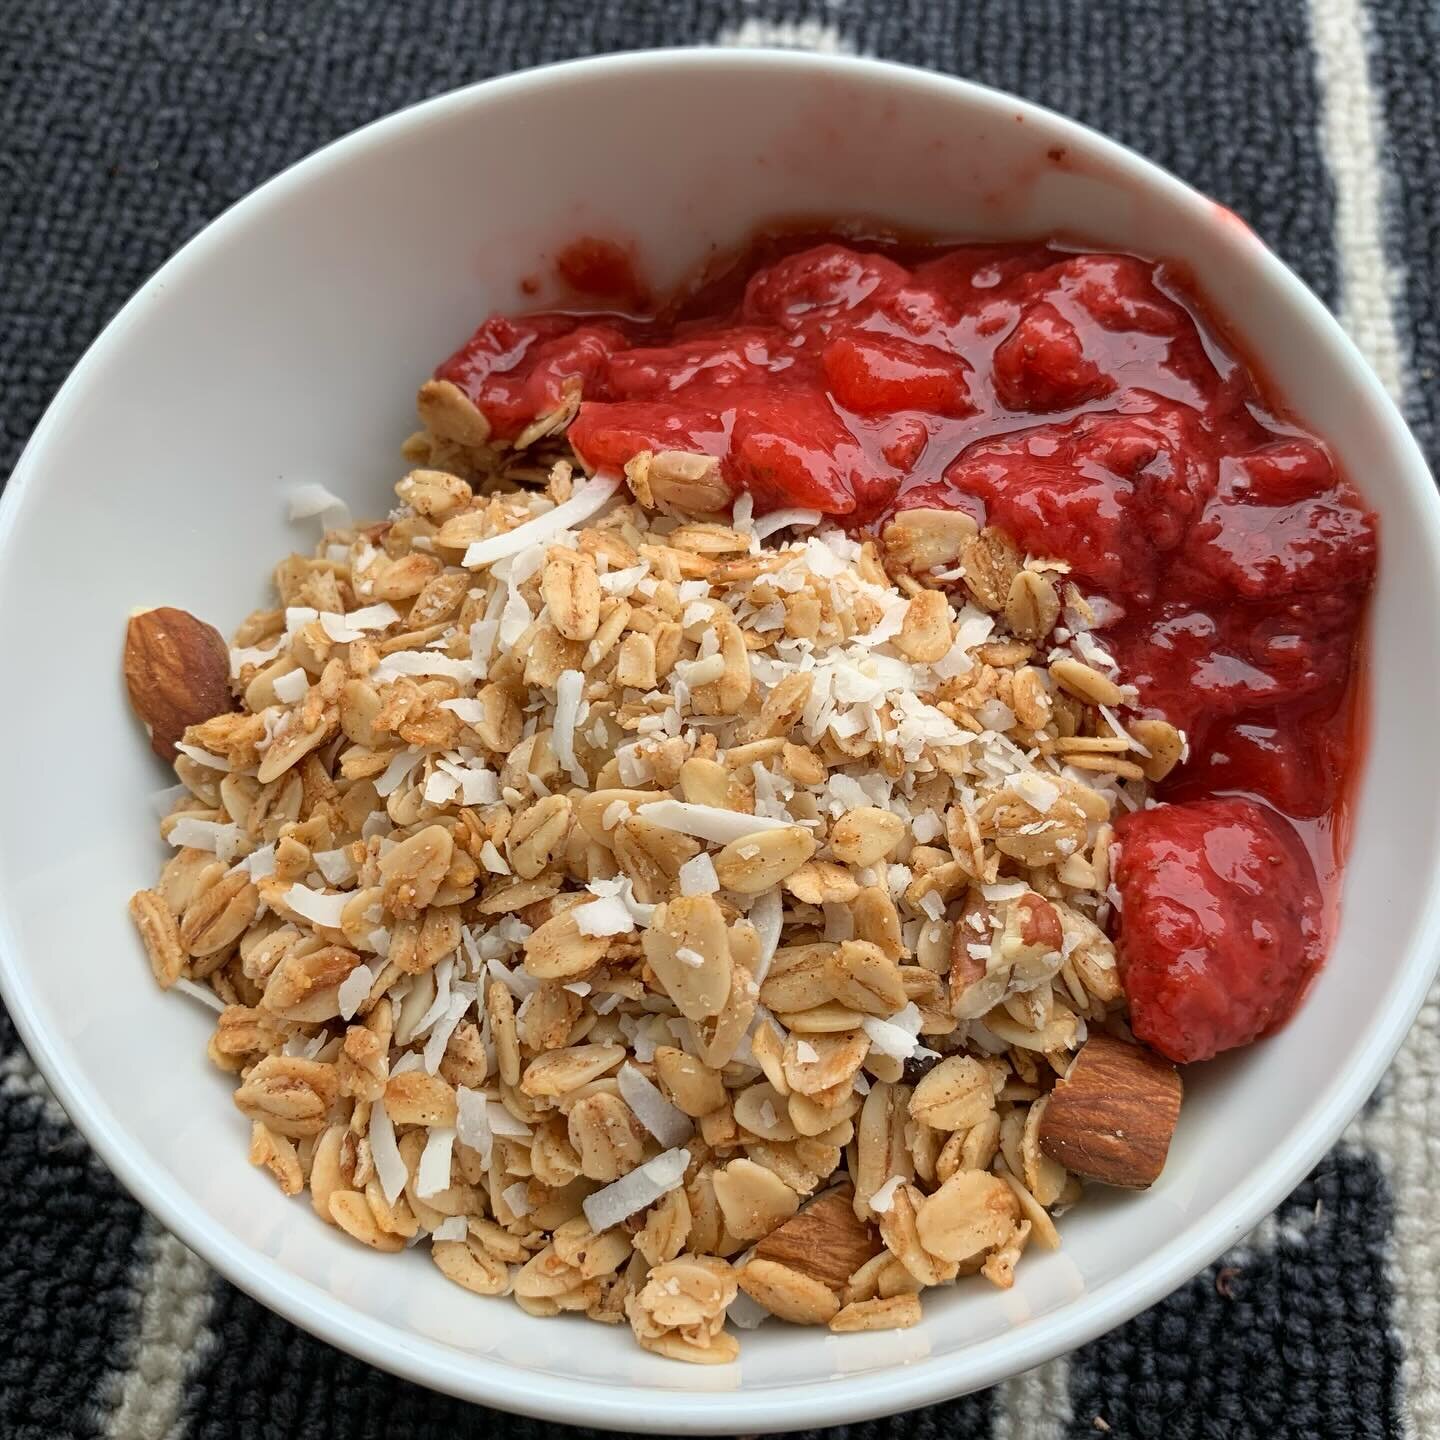 Granola Bowls! Housemade vegan and gluten free granola, yogurt (yep, we have vegan yogurt too) and strawberry compote is the perfect antidote to these grey, drizzly days. 

Stay tuned for another delicious announcement soon! 

&nbsp;#shoplocal #hamon